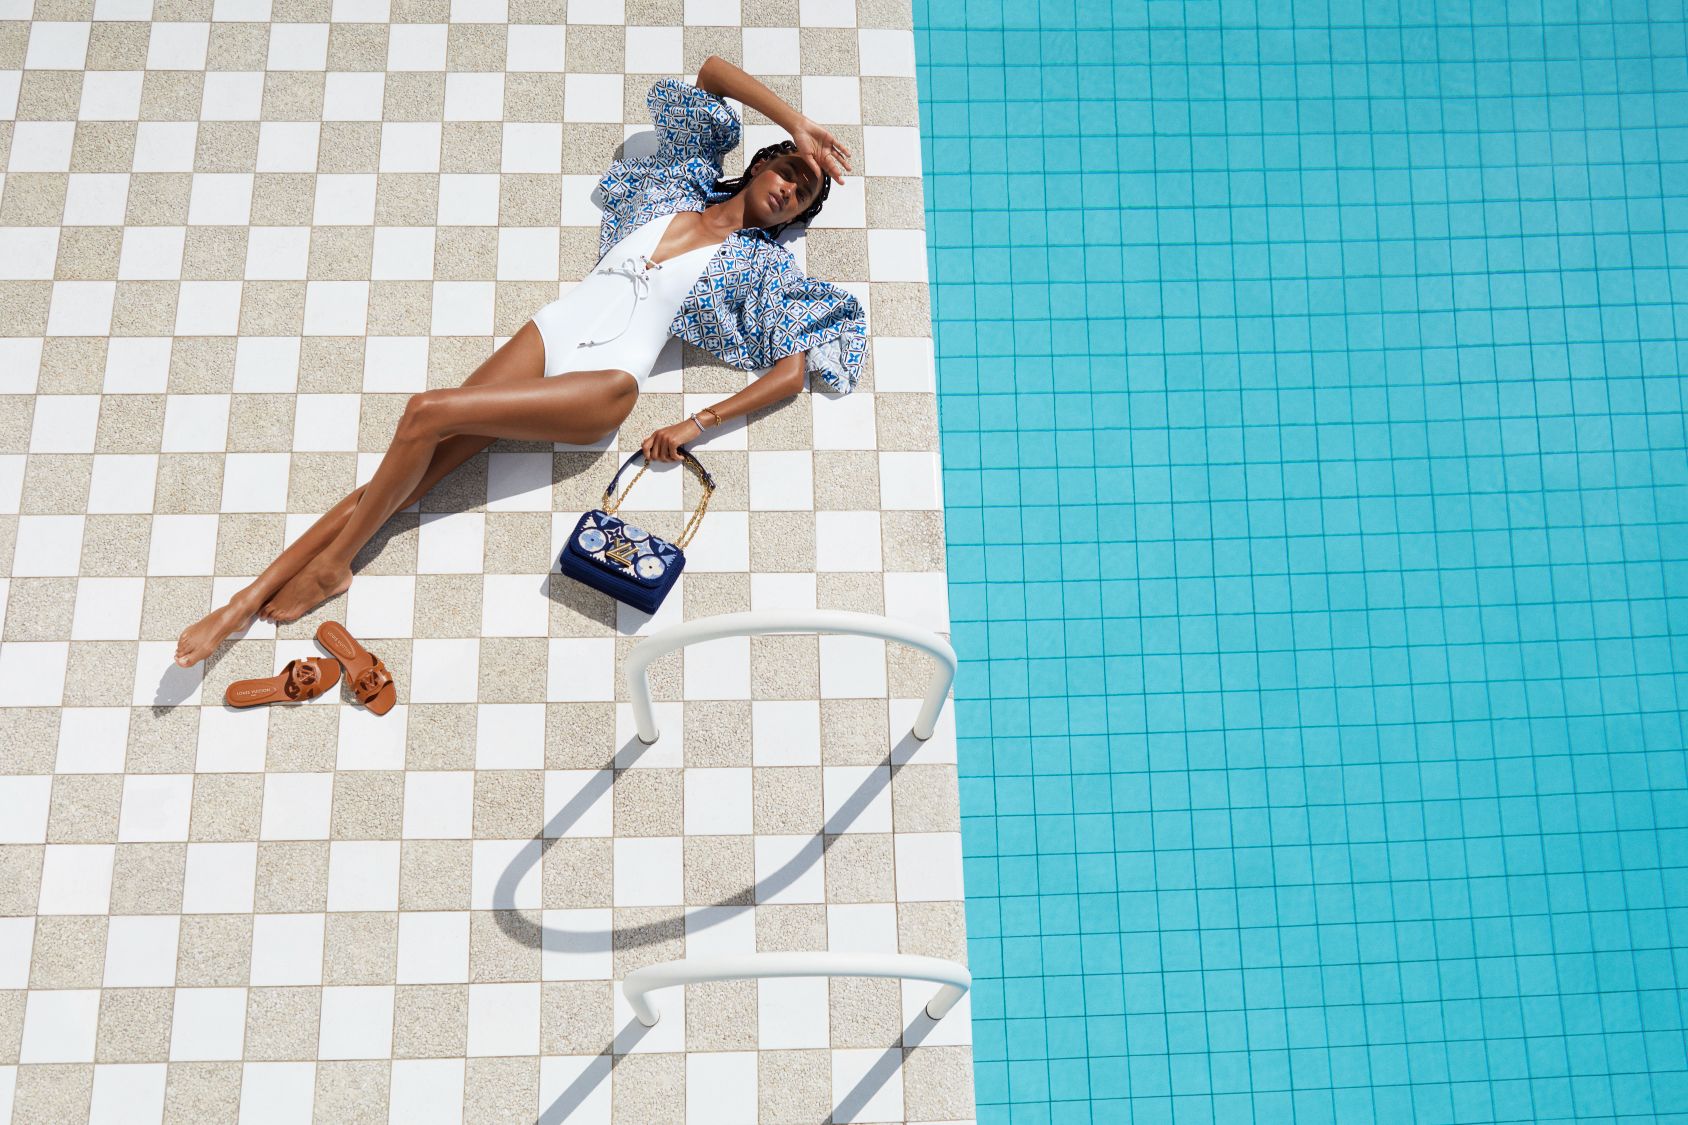 Louis Vuitton's LV By The Pool Has Every Summer Essential - A&E